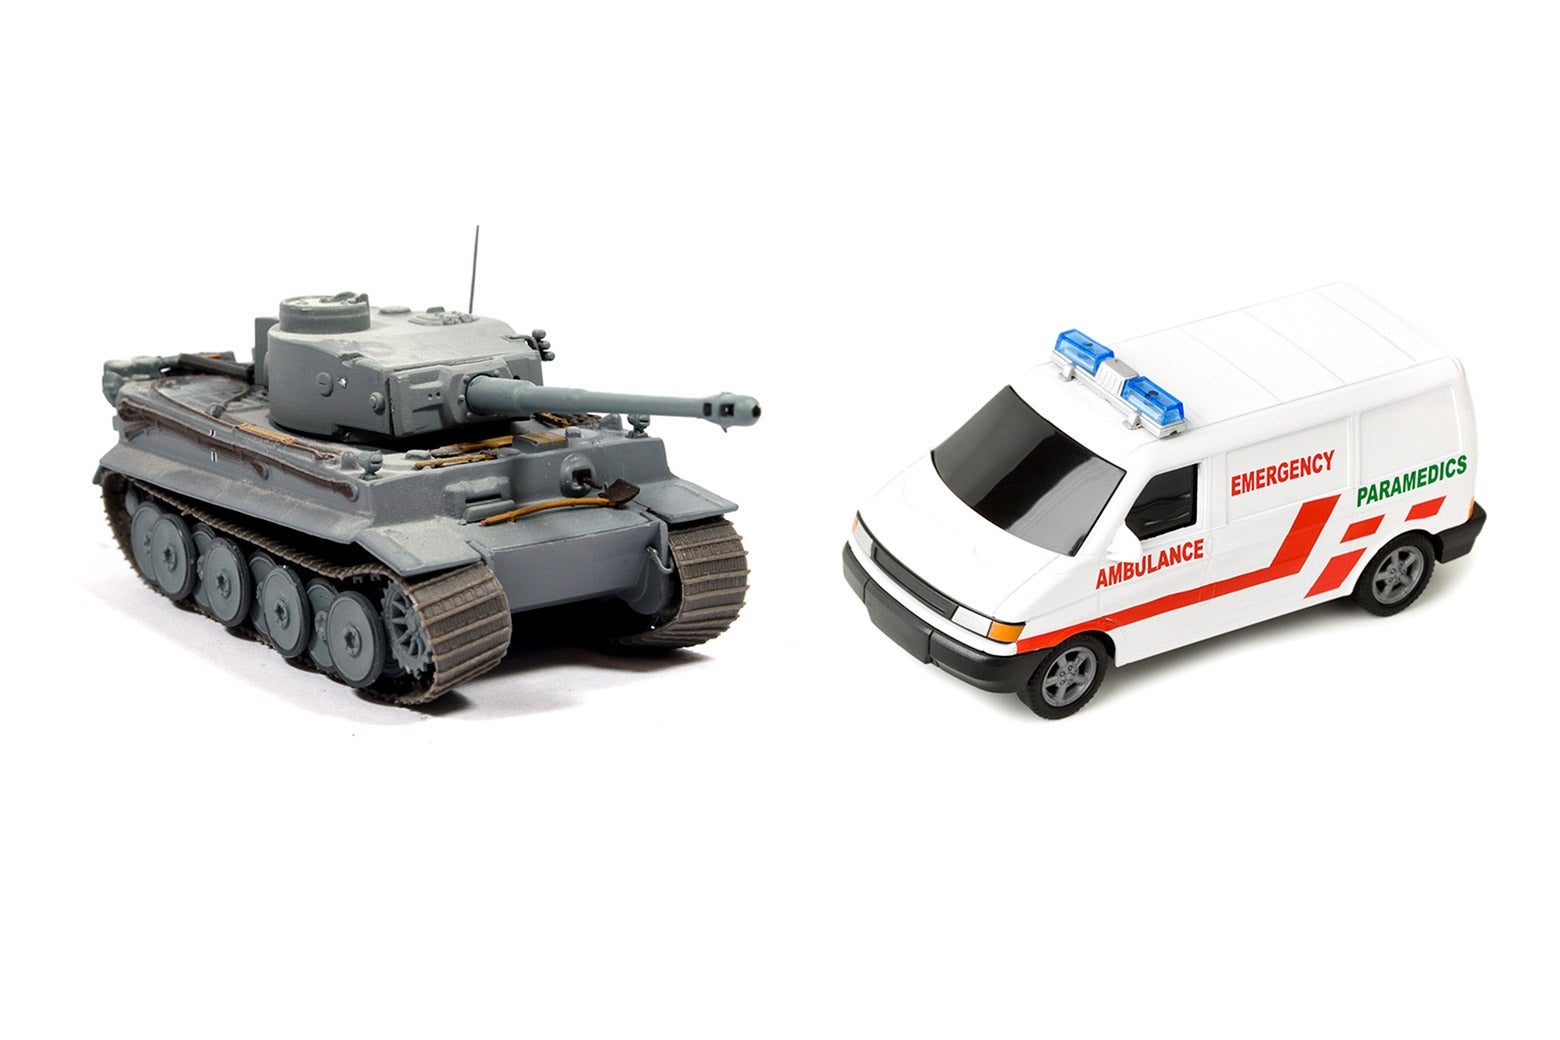 A toy tank and toy ambulance